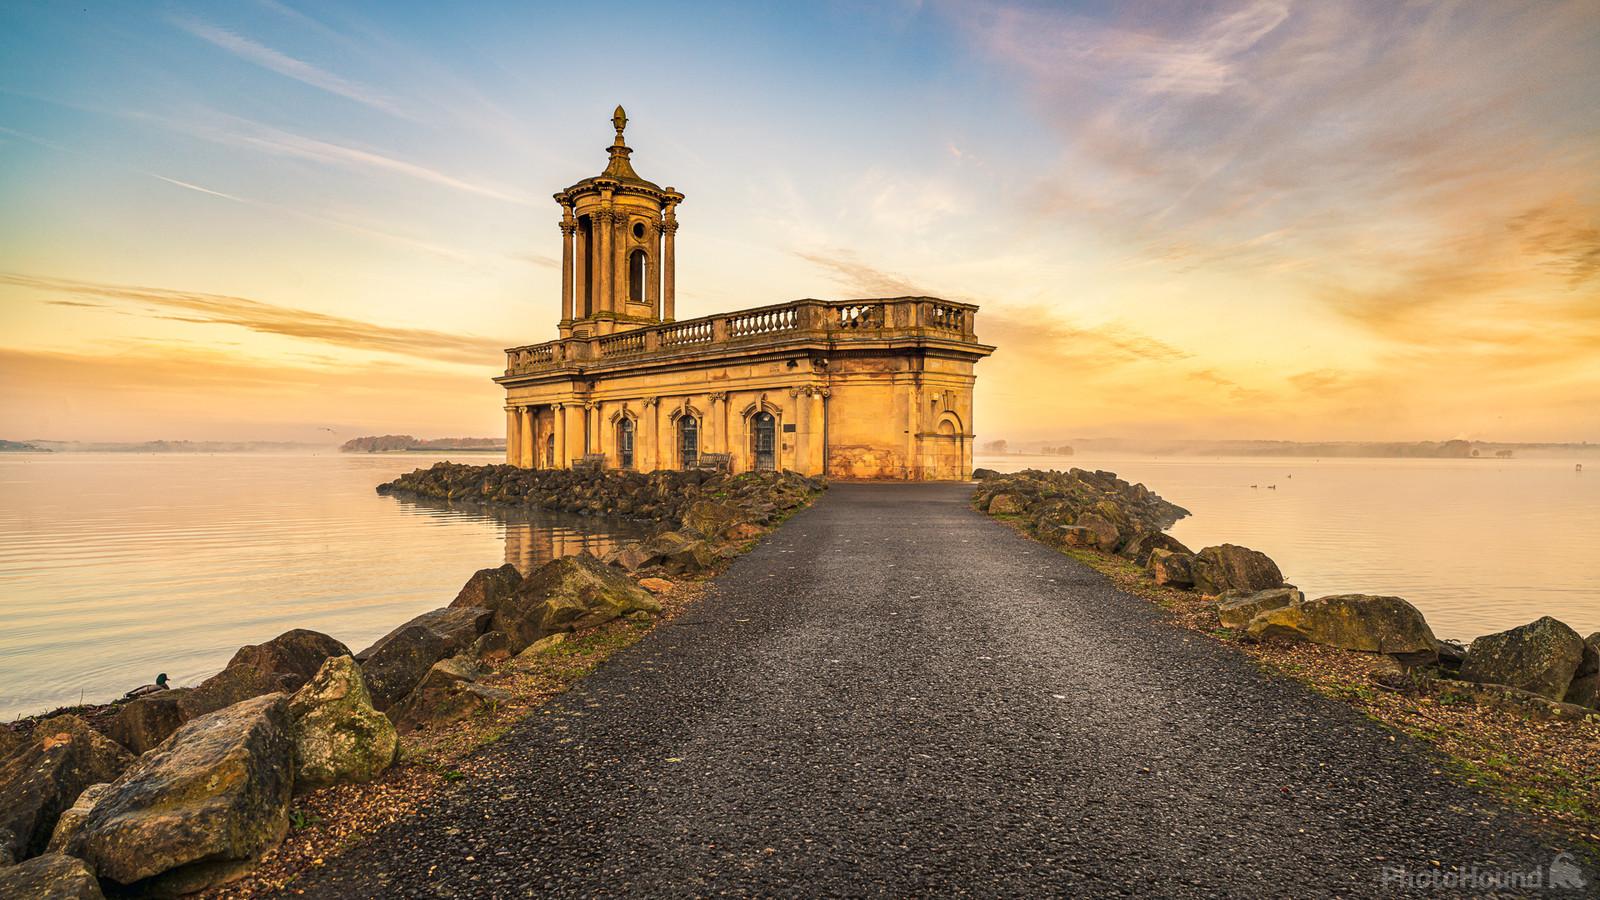 Image of Normanton Church by James Billings.